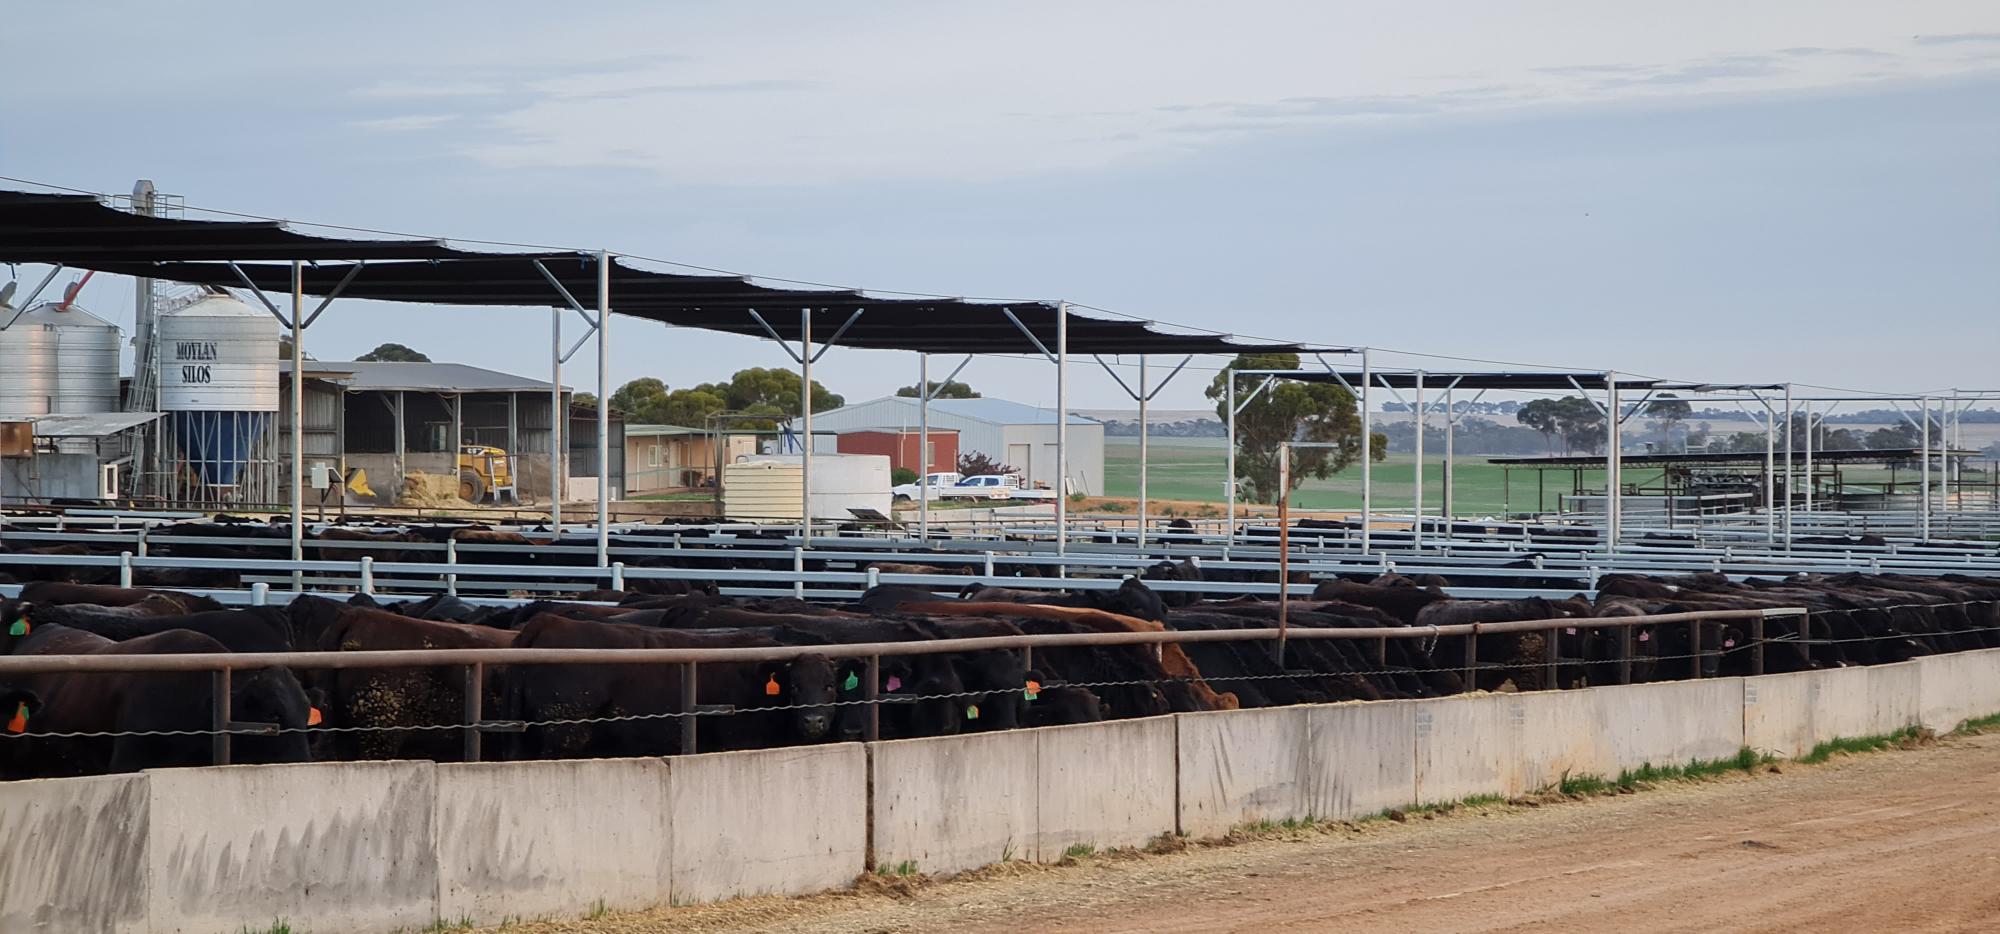 Cattle station shade structure